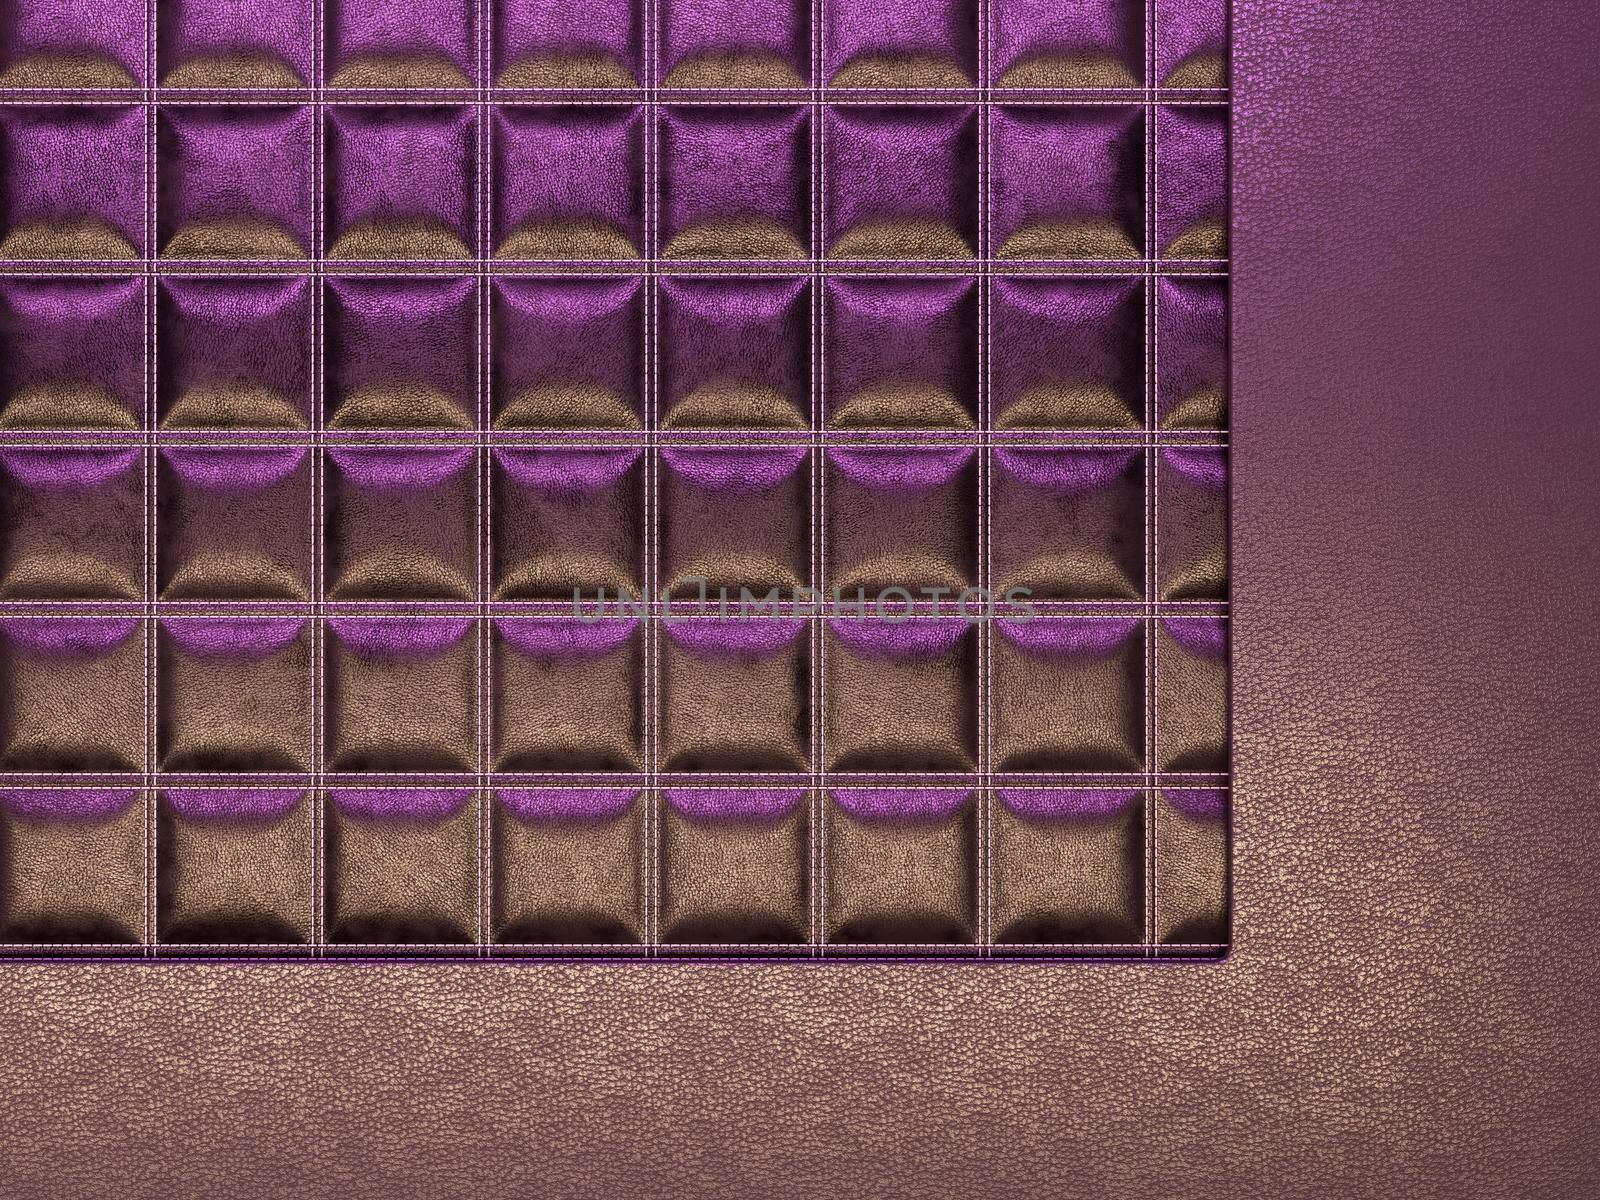 Leather stitched texture or background purple and brown by Arsgera